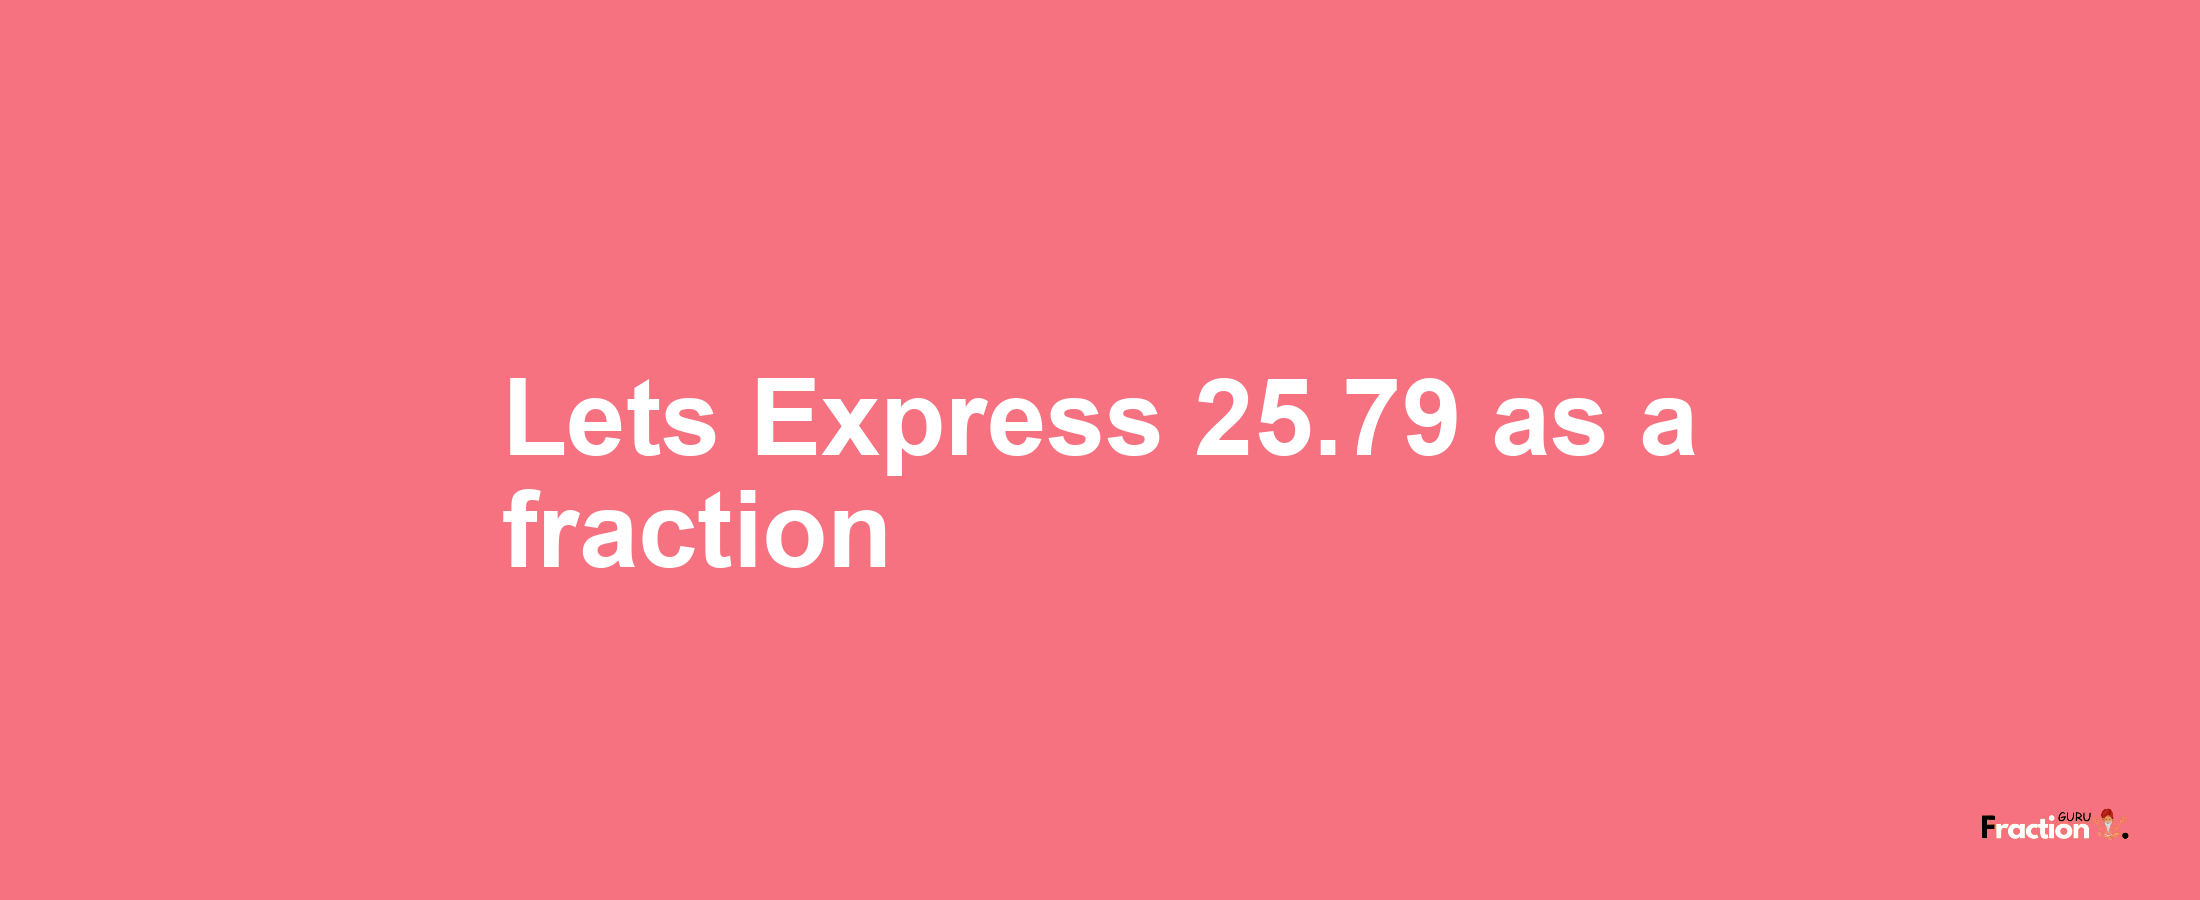 Lets Express 25.79 as afraction